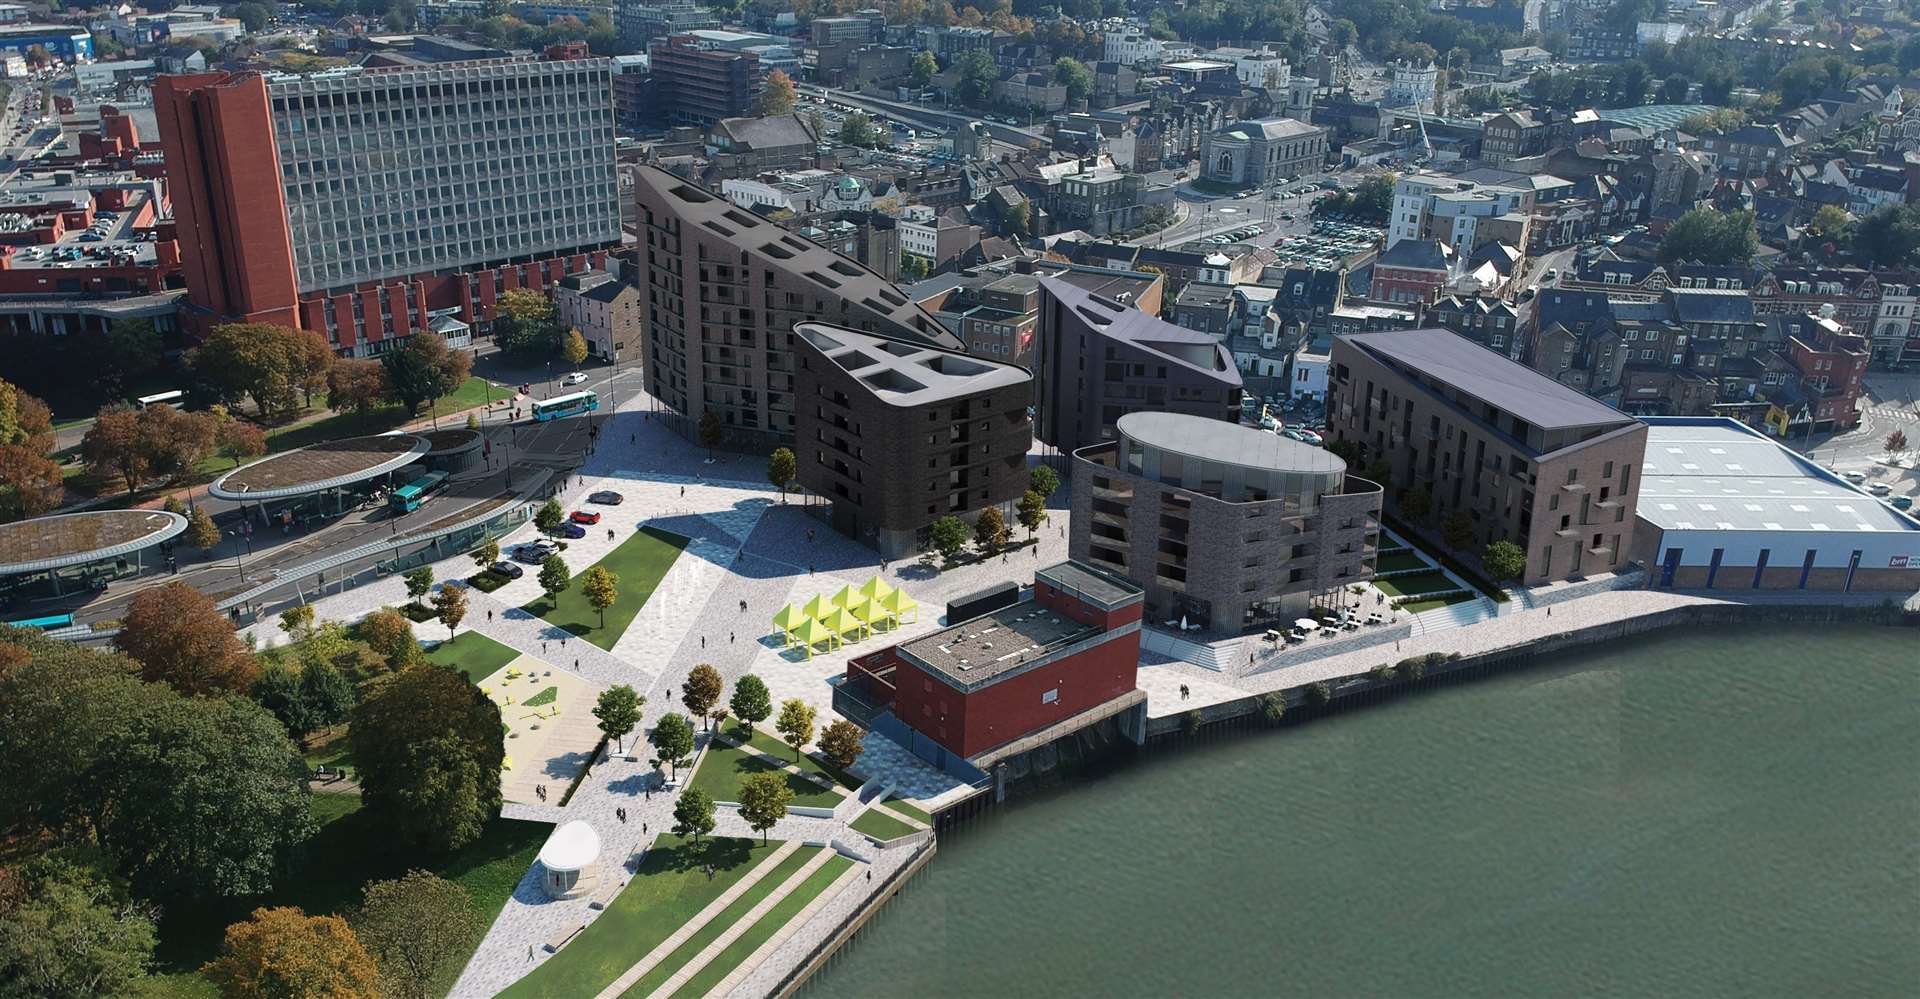 How the riverside regeneration scheme is set to look on the banks of the River Medway in Chatham